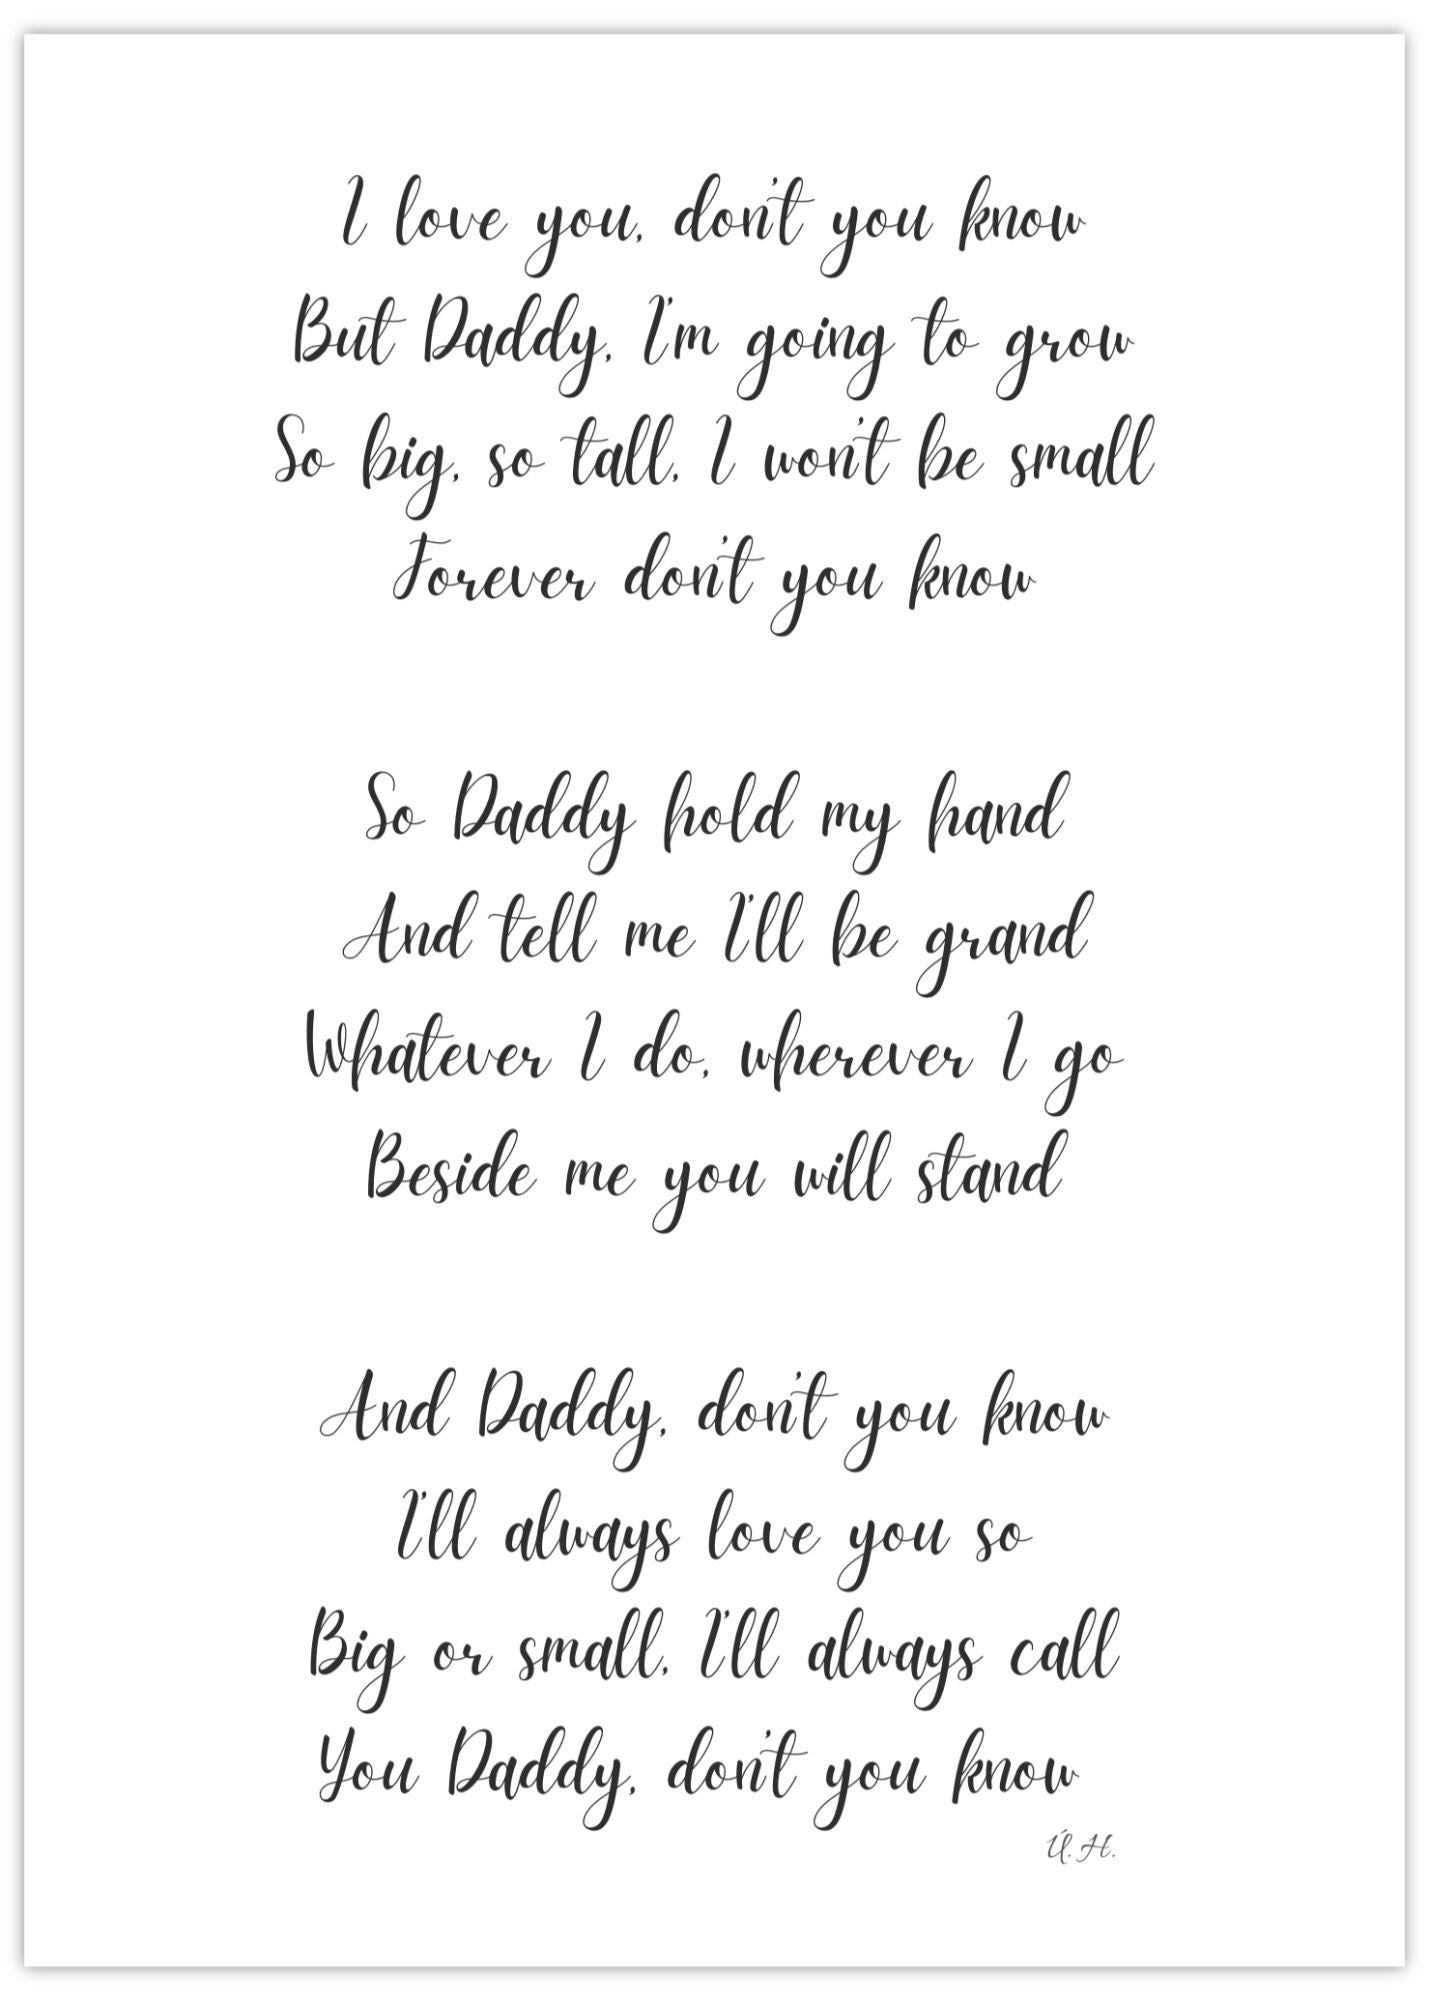 Image shows our Father's Day poem. An original poem by Una Heaney. The writing is black on a white background. It reads: I love you, don’t you know But Daddy, I’m going to grow So big, so tall, I won’t be small Forever don’t you know  So Daddy hold my hand, And tell me I’ll be grand Whatever I do, wherever I go Beside me you will stand  And Daddy, don’t you know I’ll always love you so Big or small, I’ll always call You Daddy, don’t you know.